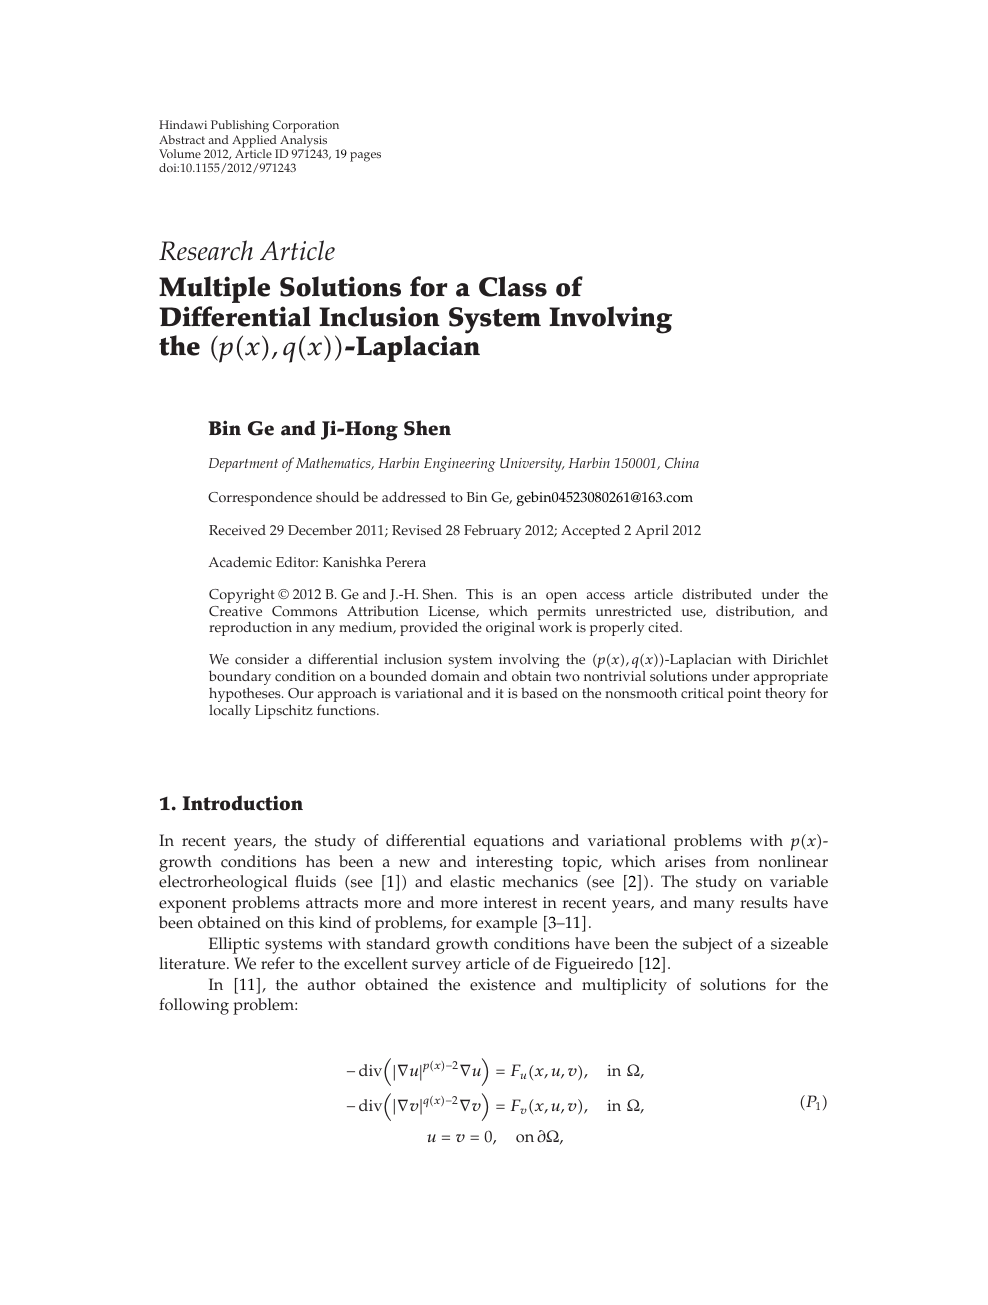 Multiple Solutions For A Class Of Differential Inclusion System Involving The P X Q X Laplacian Topic Of Research Paper In Mathematics Download Scholarly